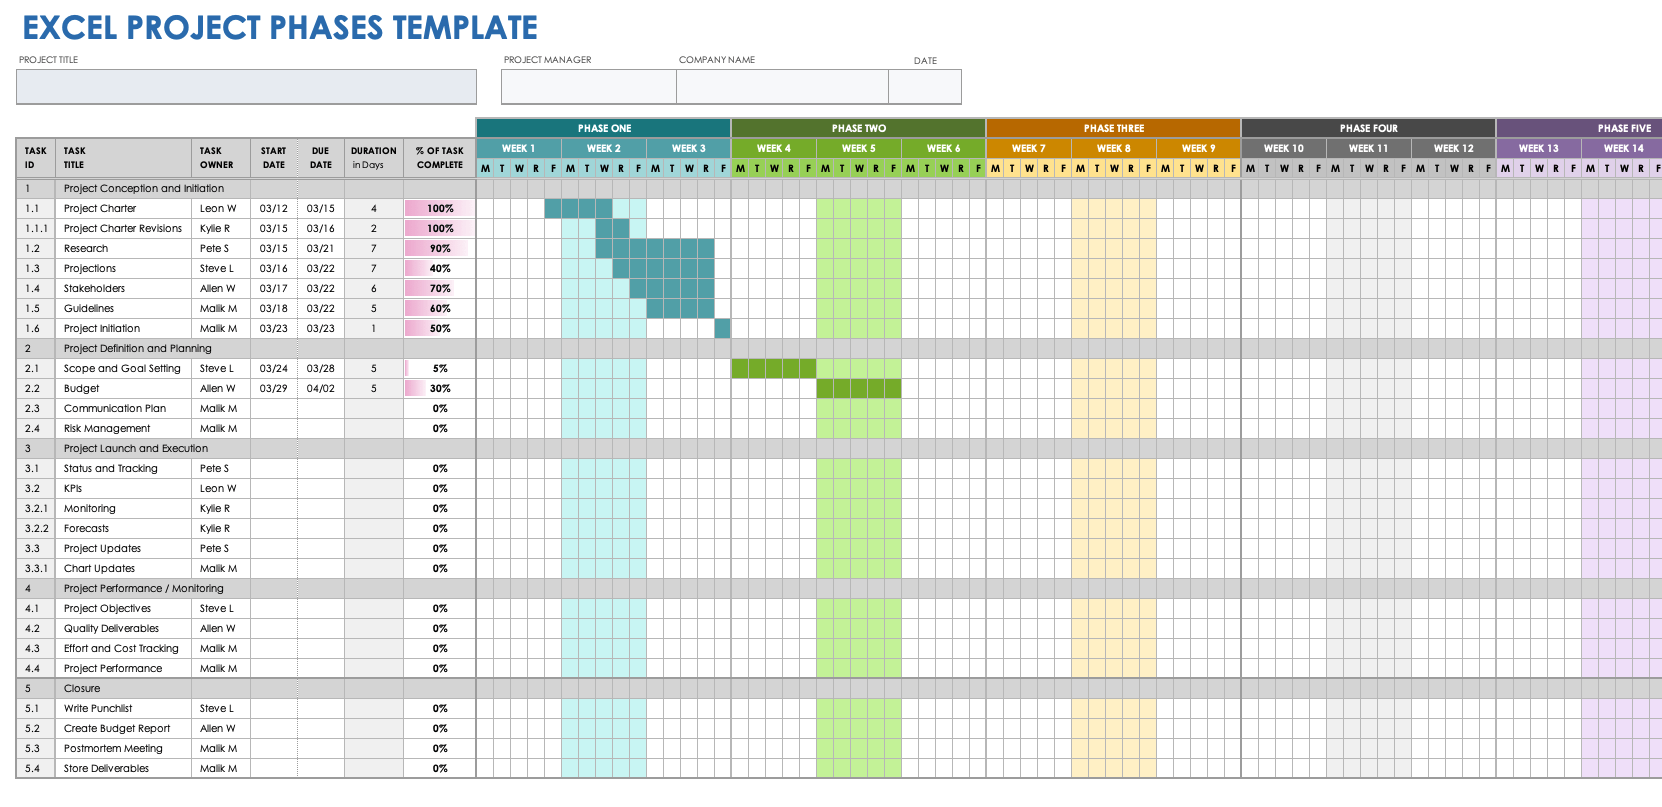 Project Phases Template for Excel